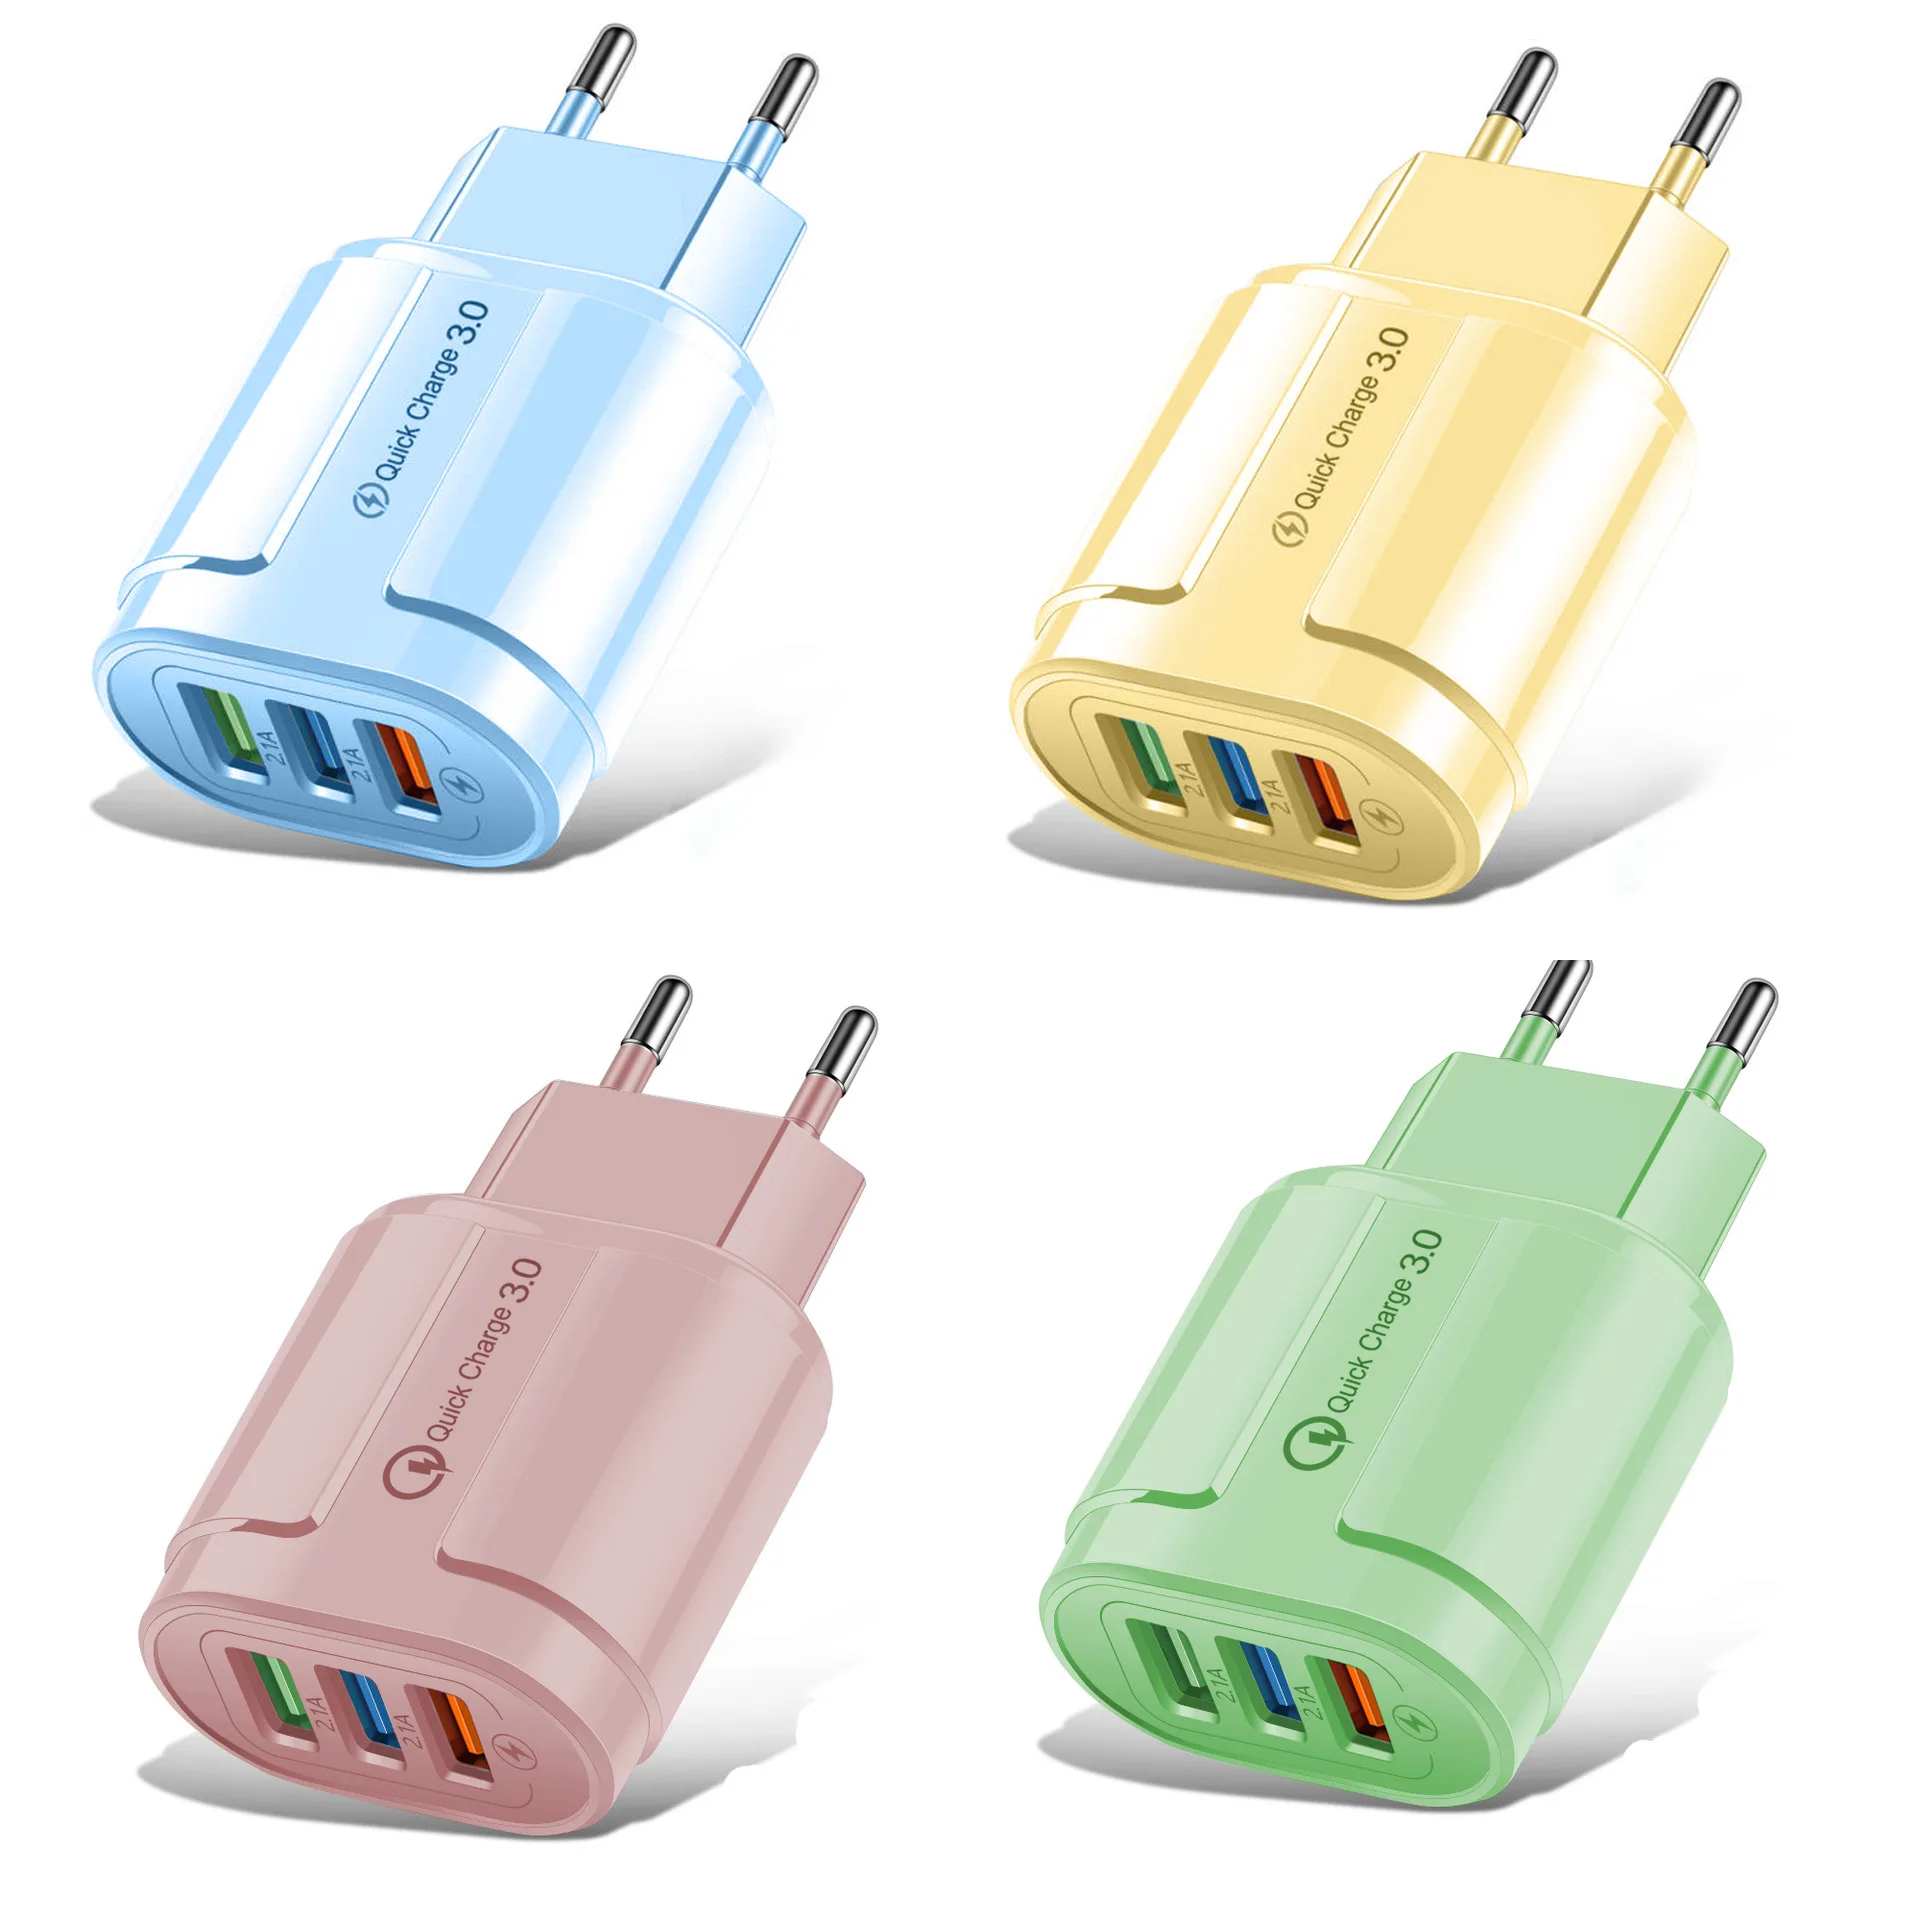 

USB Charger Quick charge 2A 3 Ports Mobile Phone Chargers Fast Charging For Samsung S8 S9 S10 Note 8 9 A50 Xiaomi Huawei iPhone